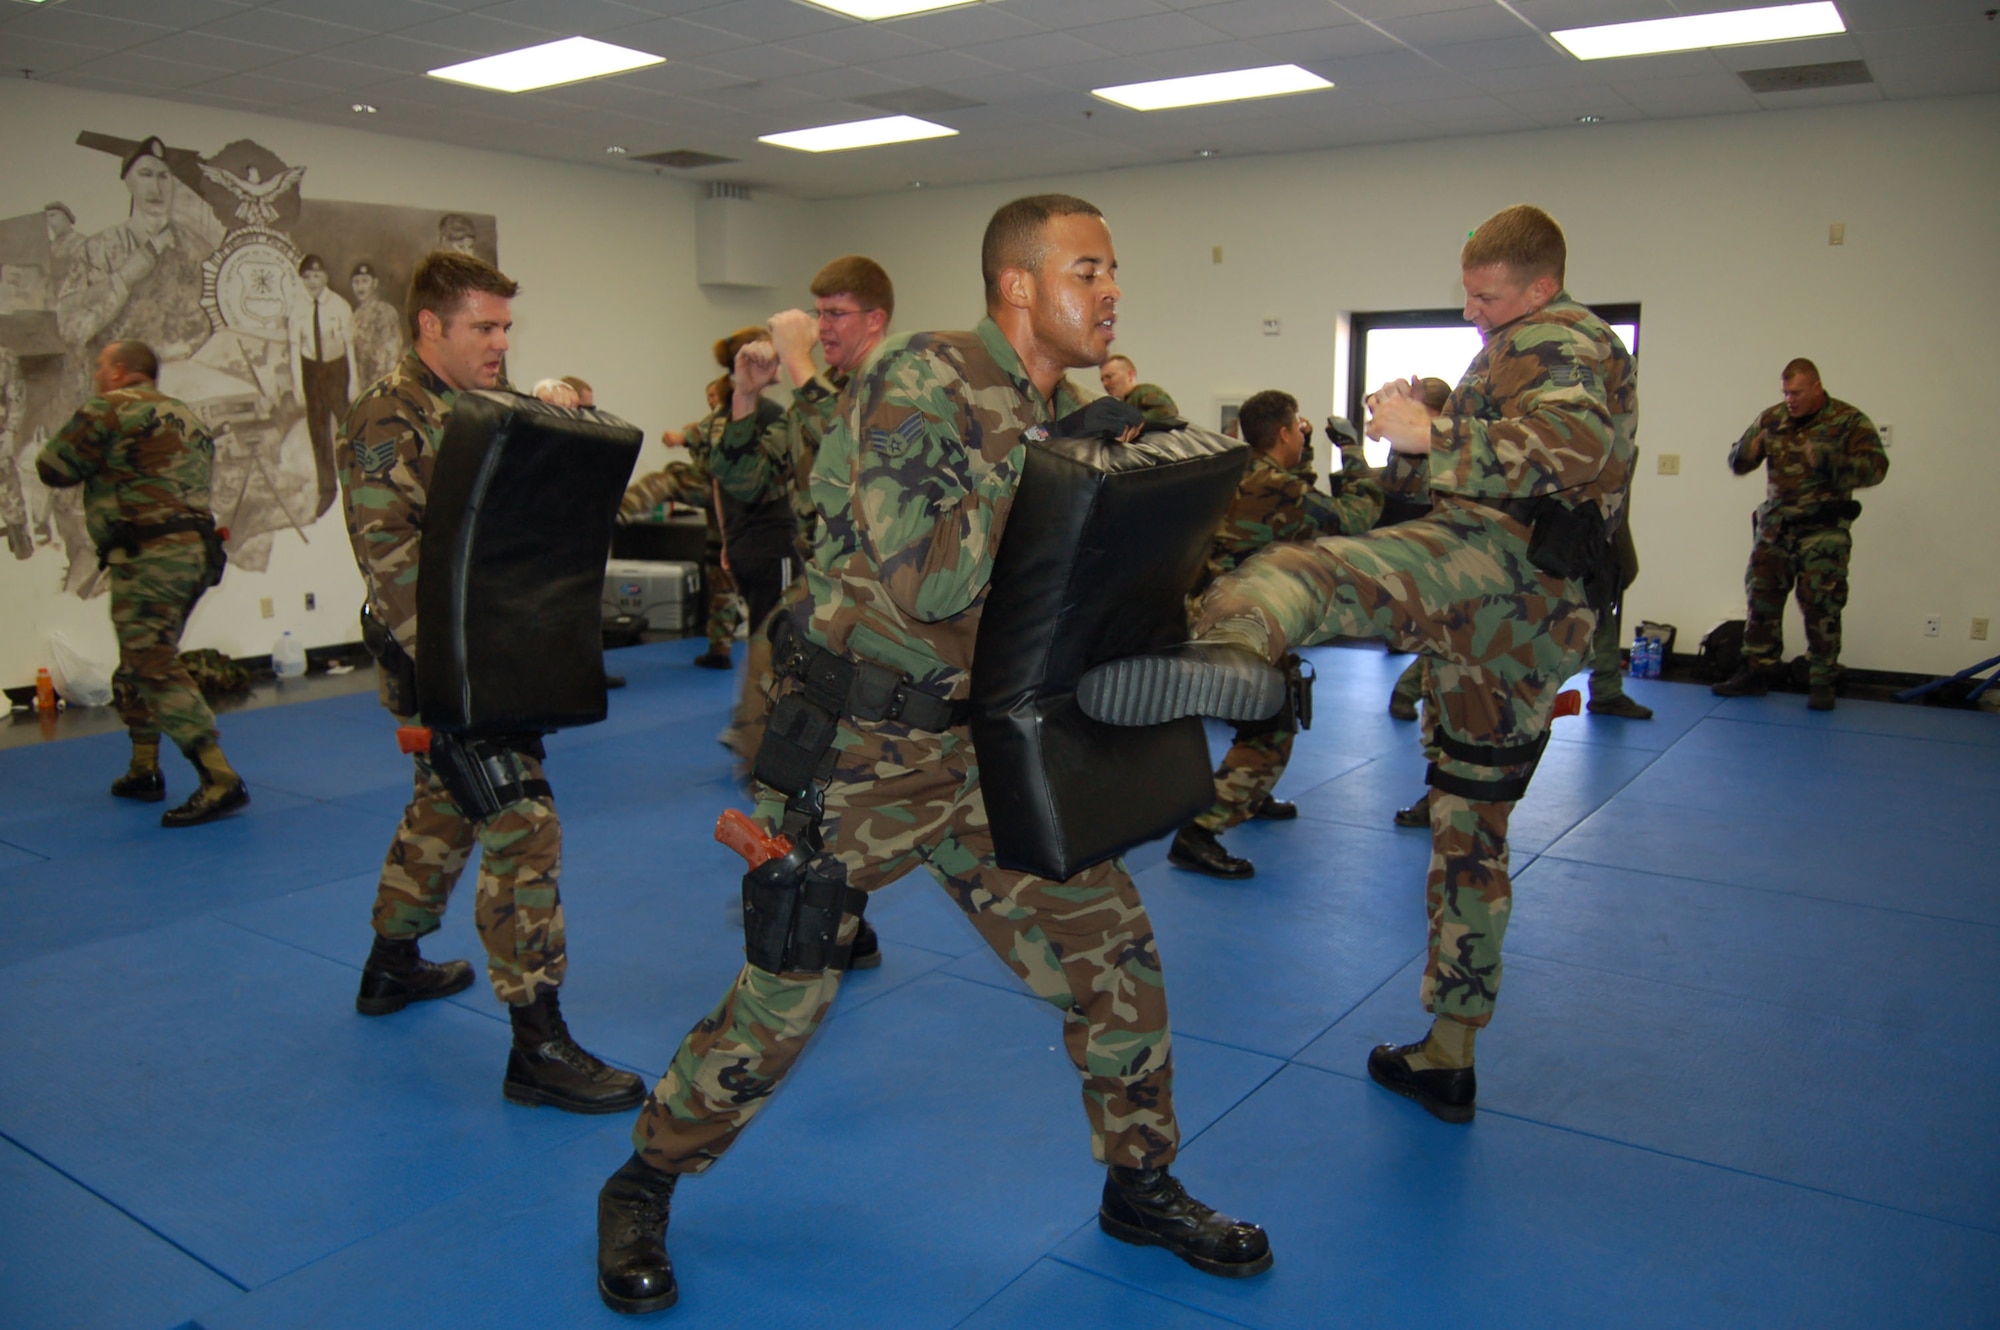 Members of the 95th Security Forces Squadron perform combat techniques during Krav Maga martial arts training here Sept. 14. Krav Maga is the Israeli military's official system of self defense and hand-to-hand combat. (Photo by Senior Airman Julius Delos Reyes)